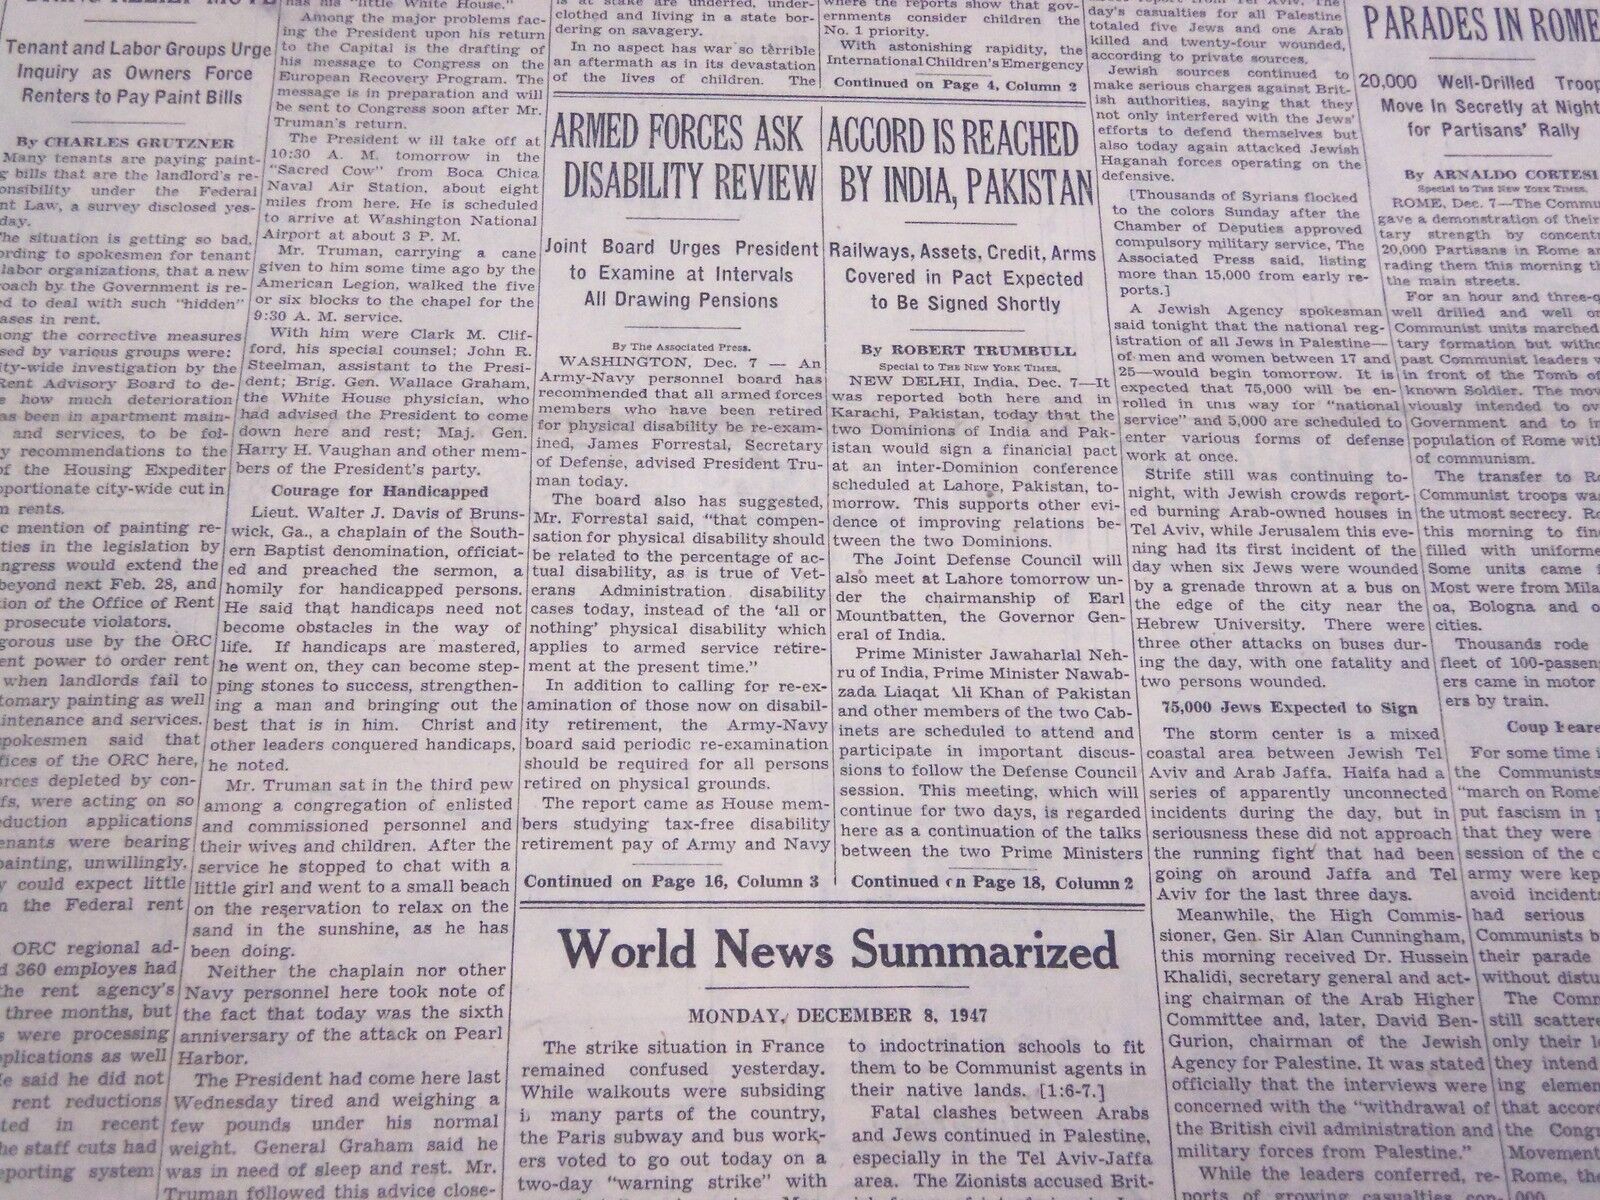 1947 DECEMBER 8 NEW YORK TIMES - INDIA-PAKISTAN ACCORD REACHED - NT 3484